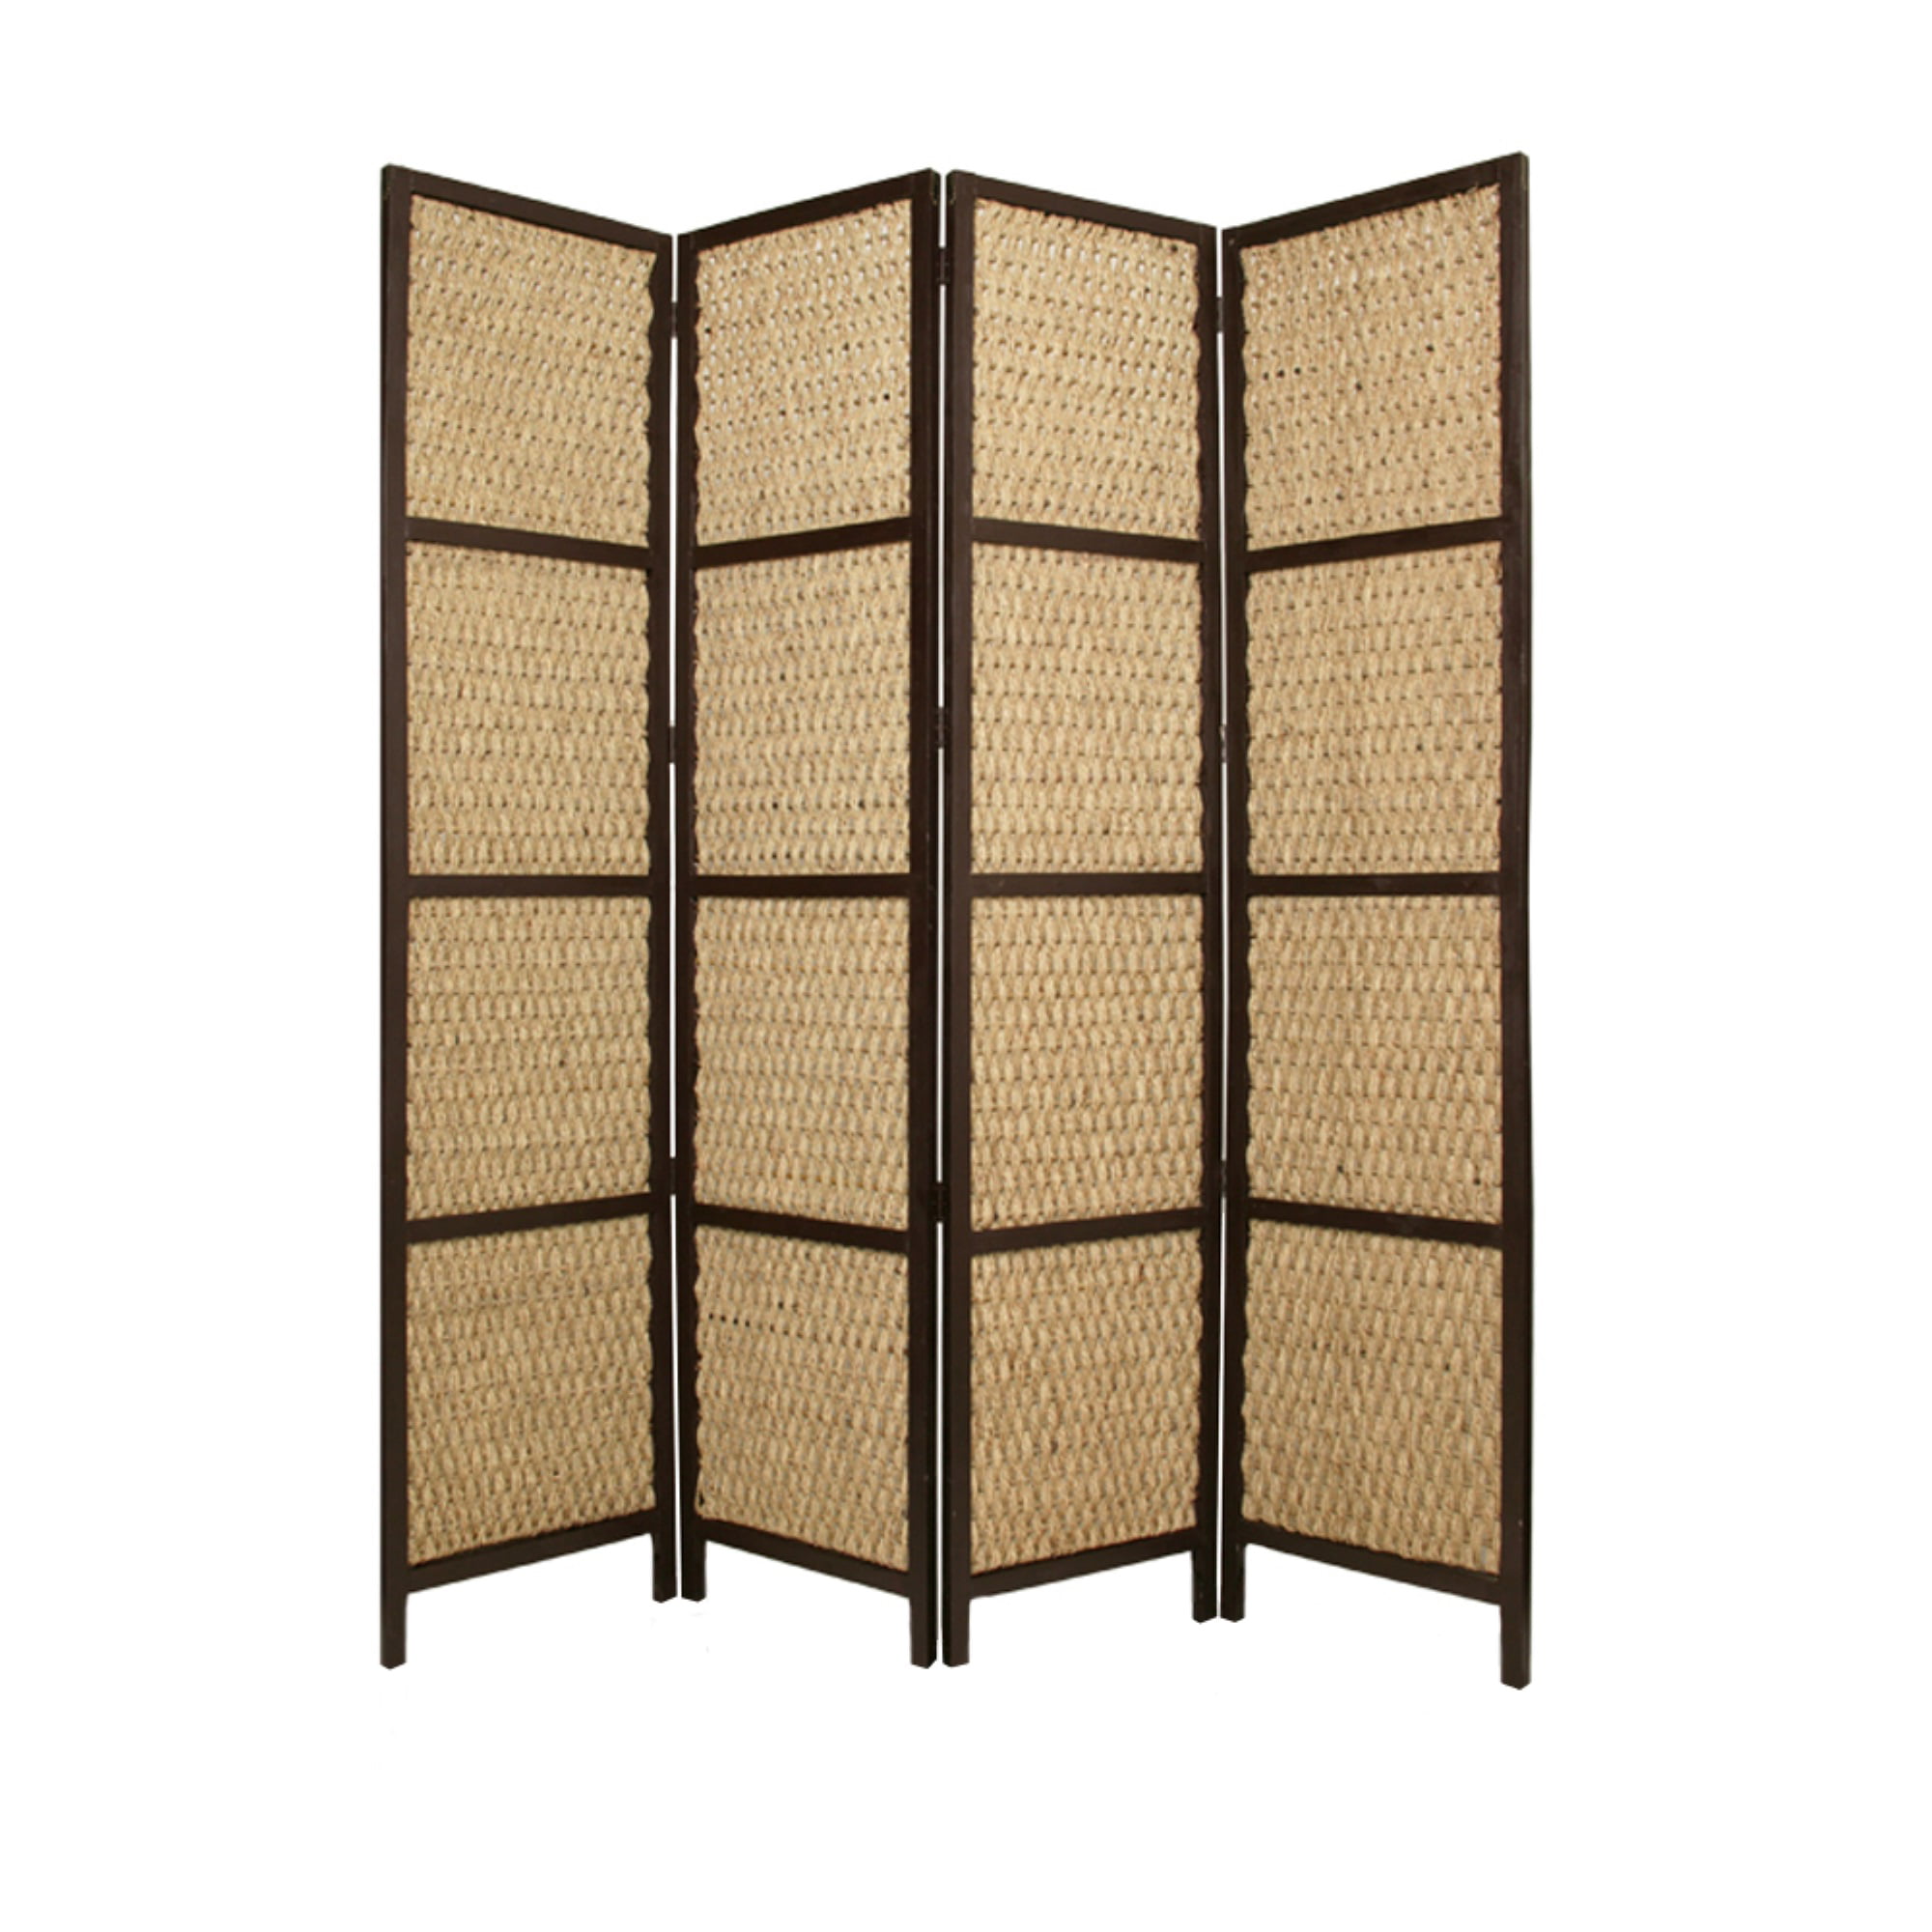 Bm26655 4 Panel Wooden Framed Screen With Sea Grass Woven Design, Brown